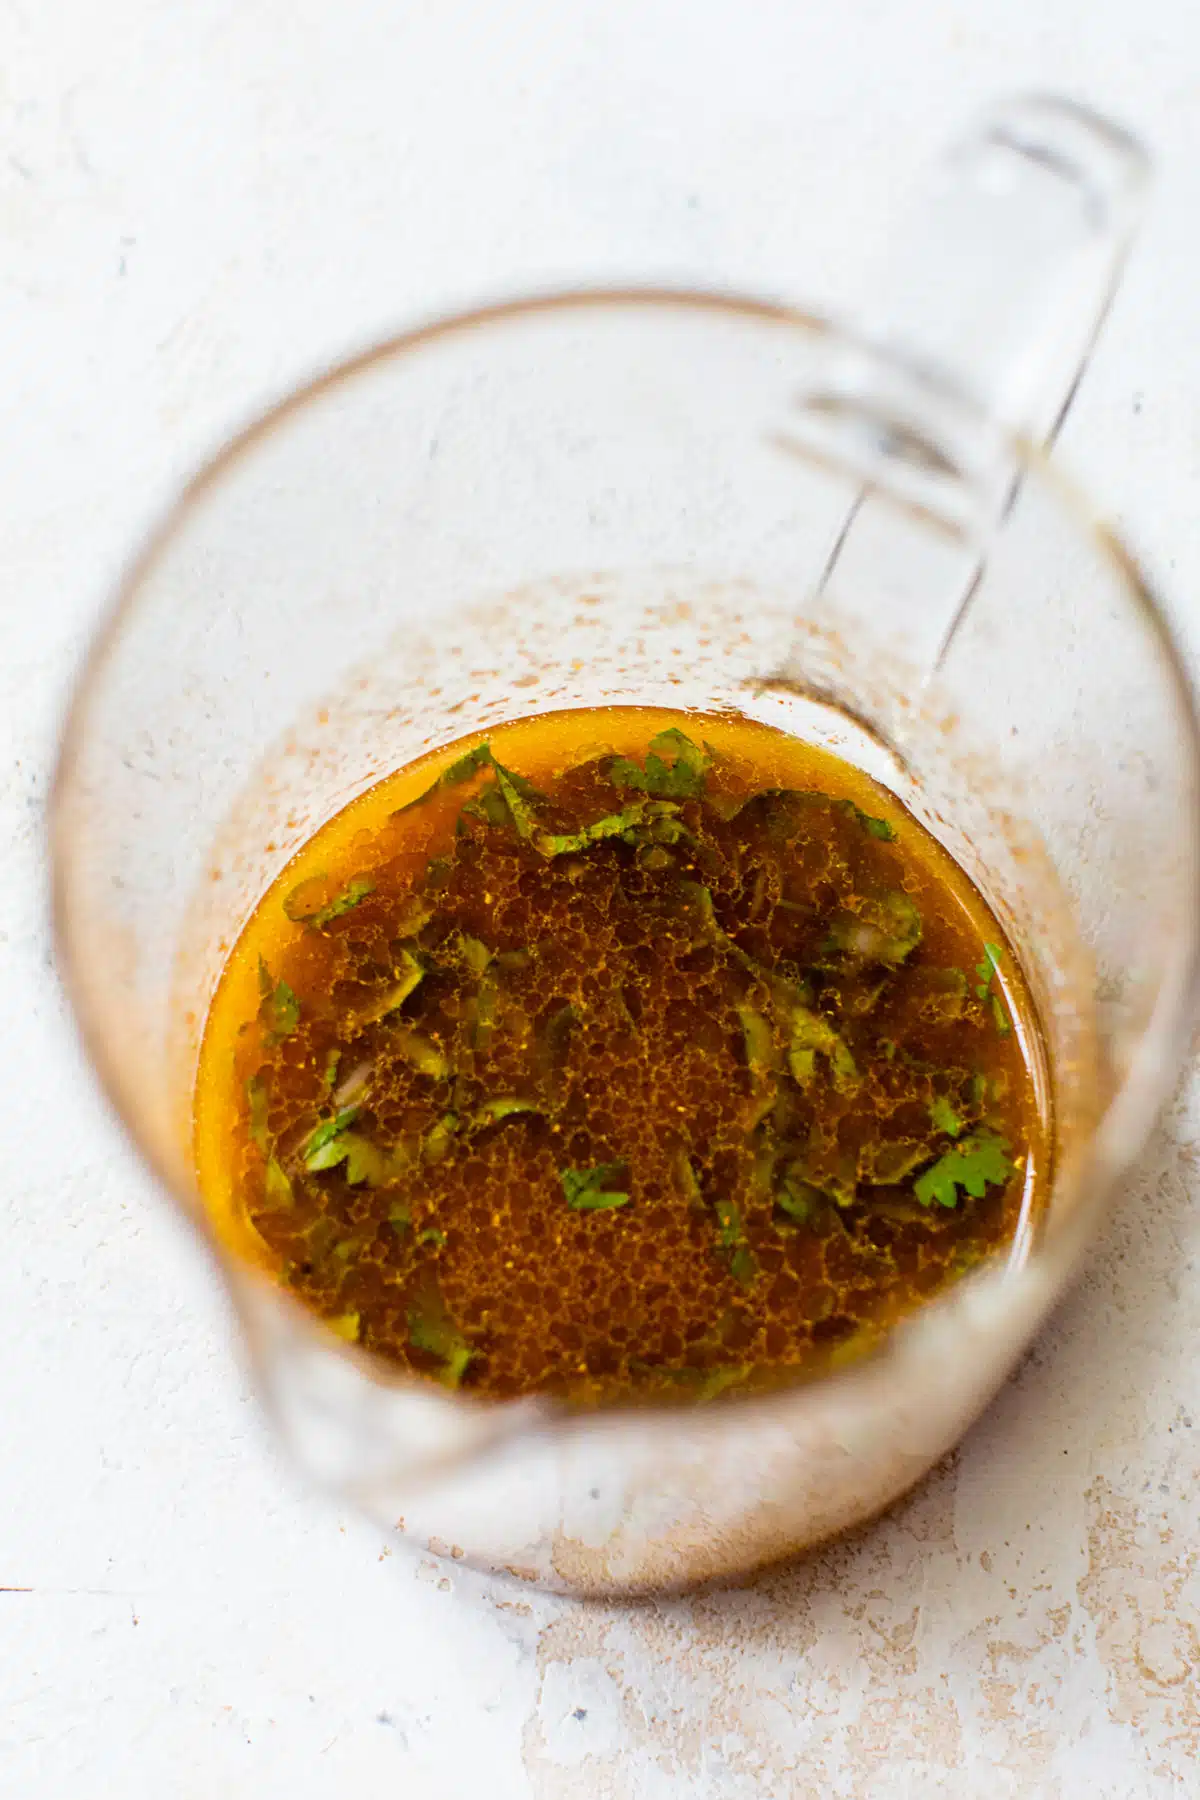 homemade vinaigrette in a glass measuring cup